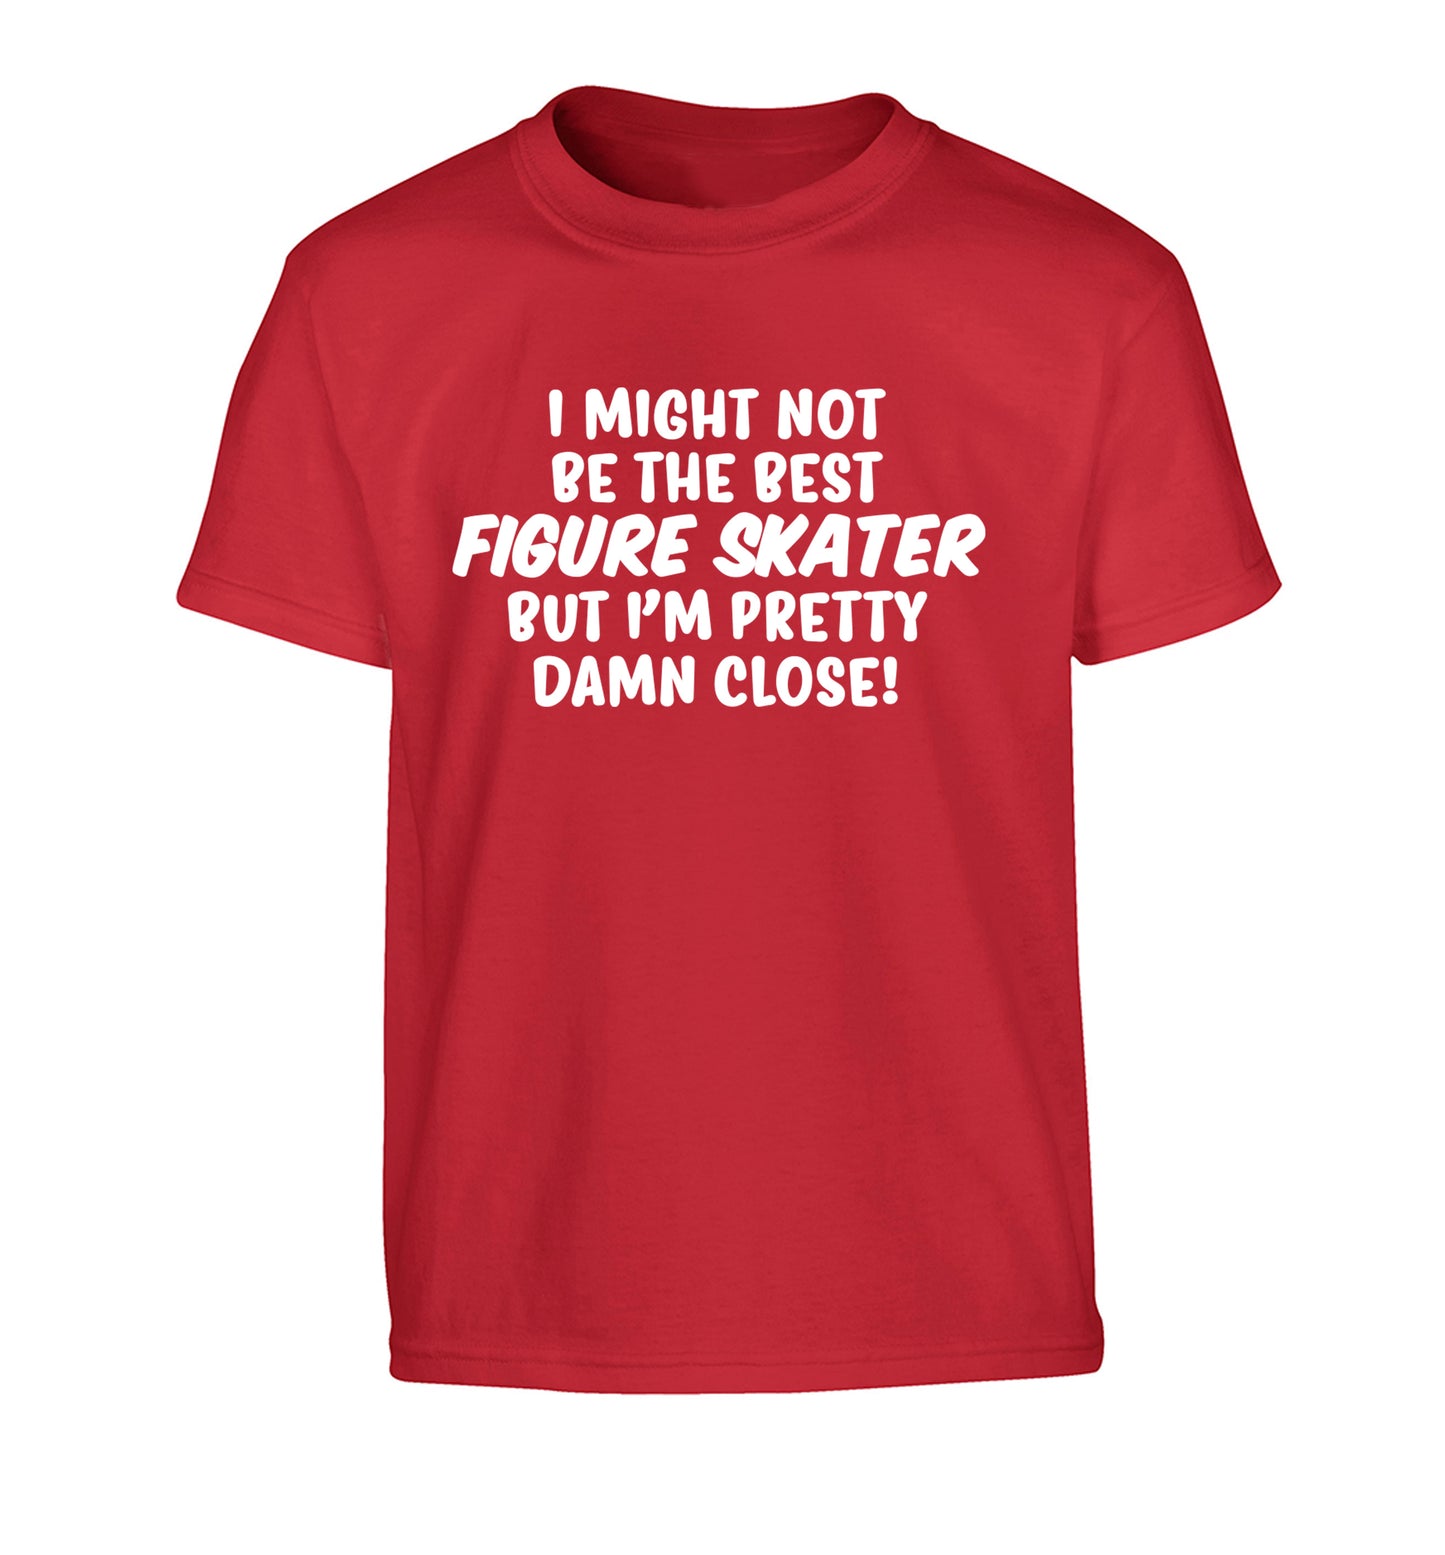 I might not be the best figure skater but I'm pretty damn close! Children's red Tshirt 12-14 Years